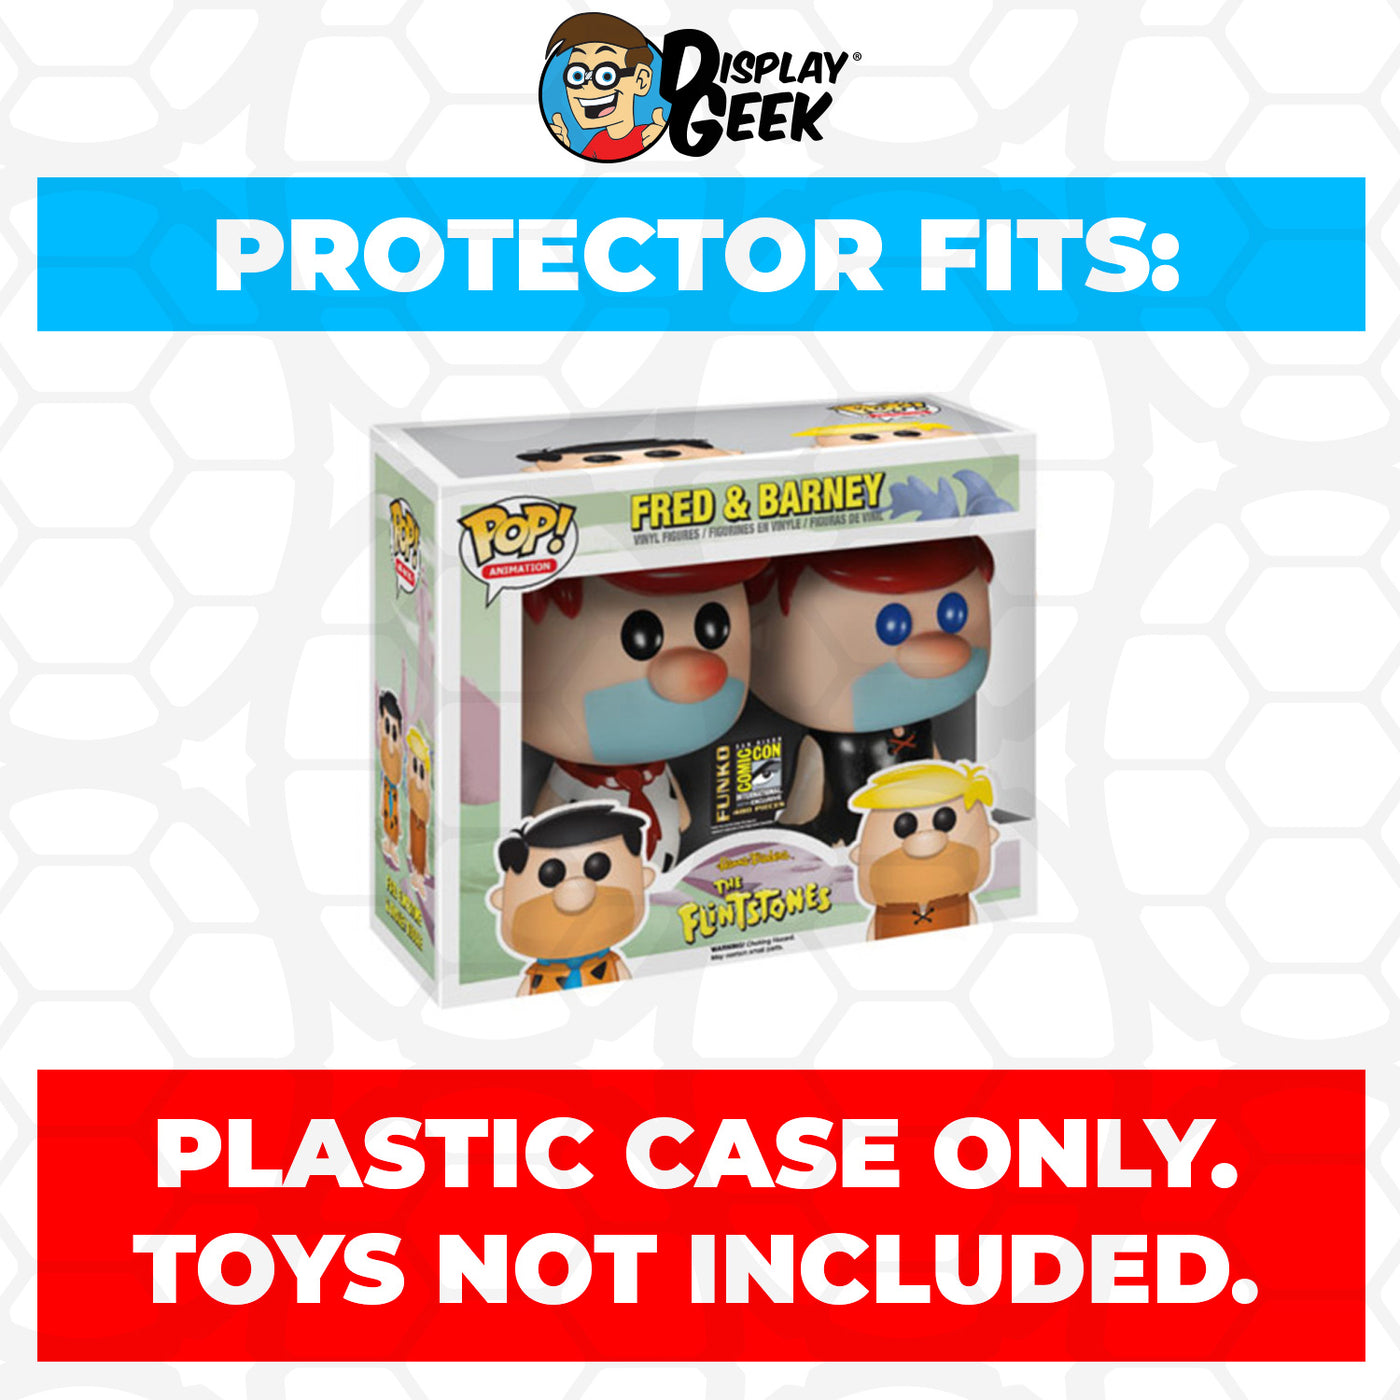 Pop Protector for 2 Pack Fred & Barney Red Hair SDCC Funko Pop on The Protector Guide App by Display Geek